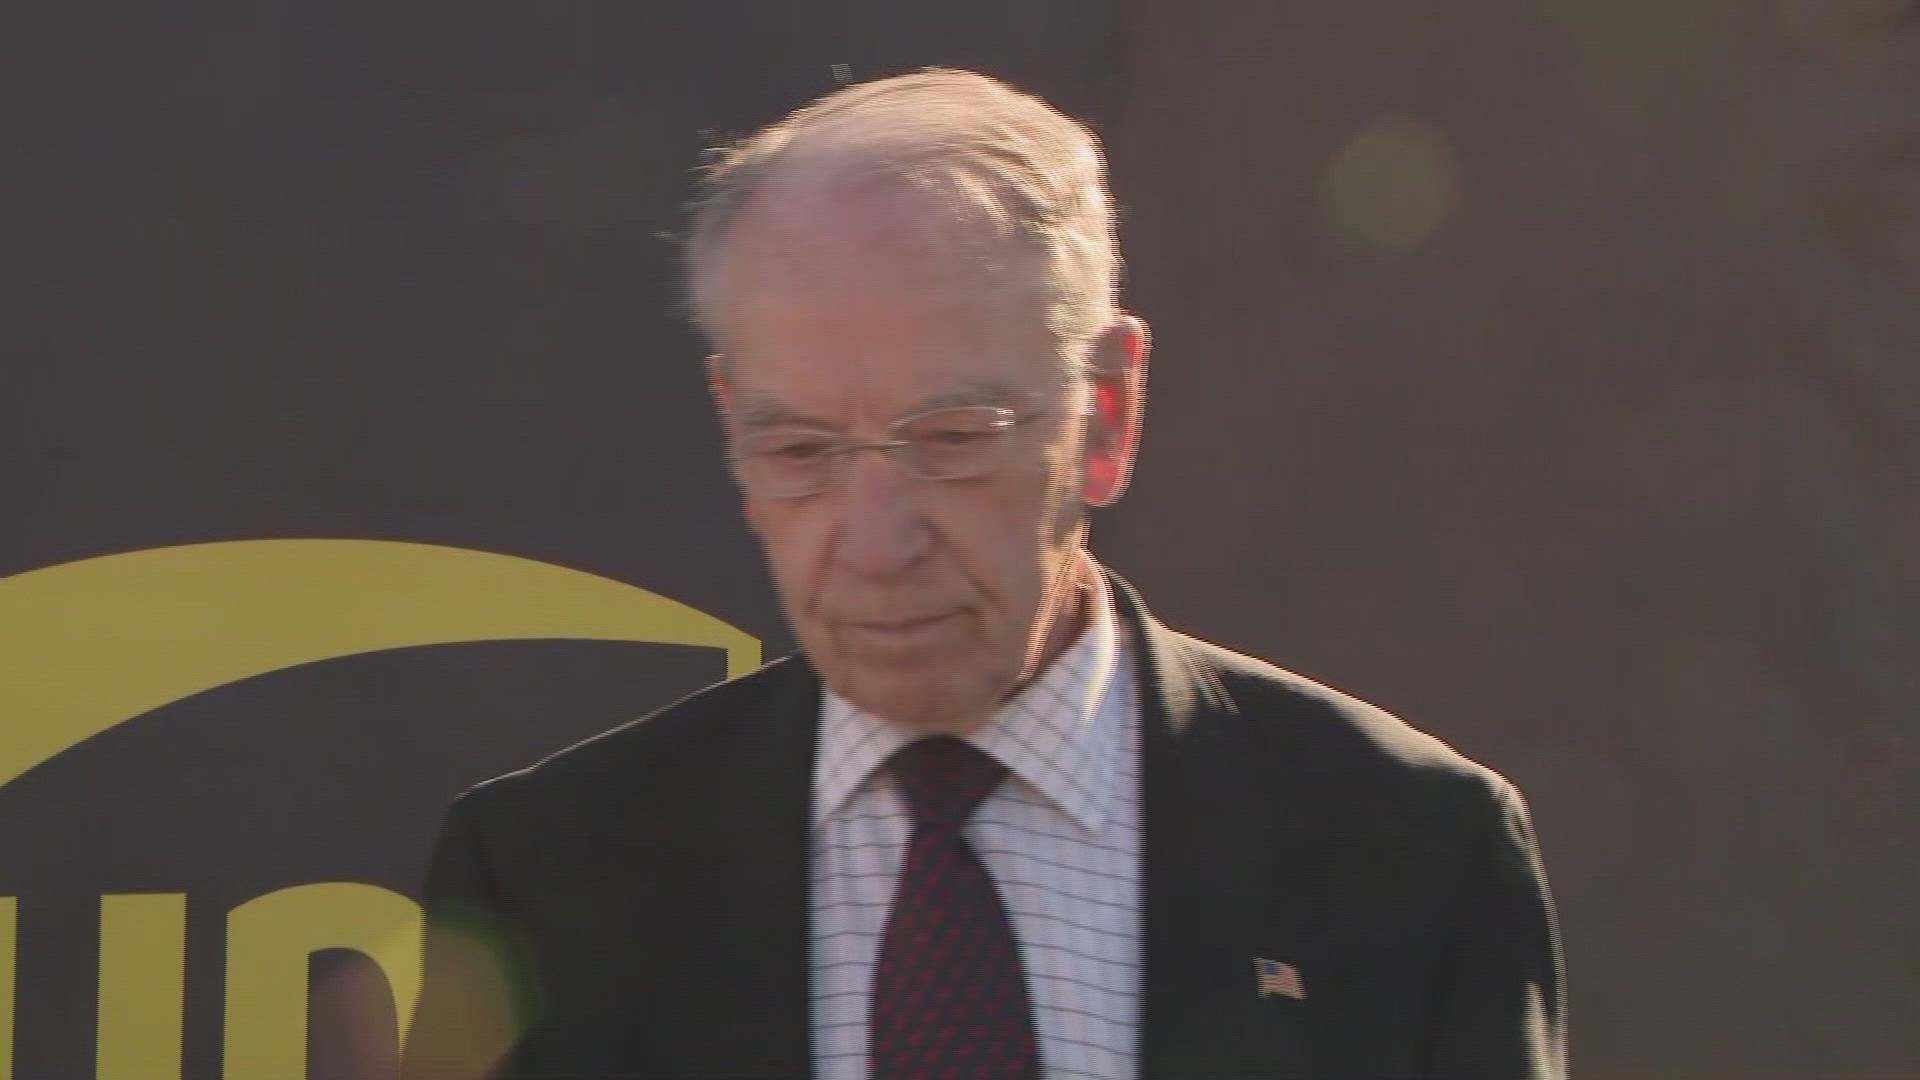 When asked on Thursday what his message was for the thousands of John Deere workers on strike, U.S. Sen. Chuck Grassley said he didn't know there was a strike.